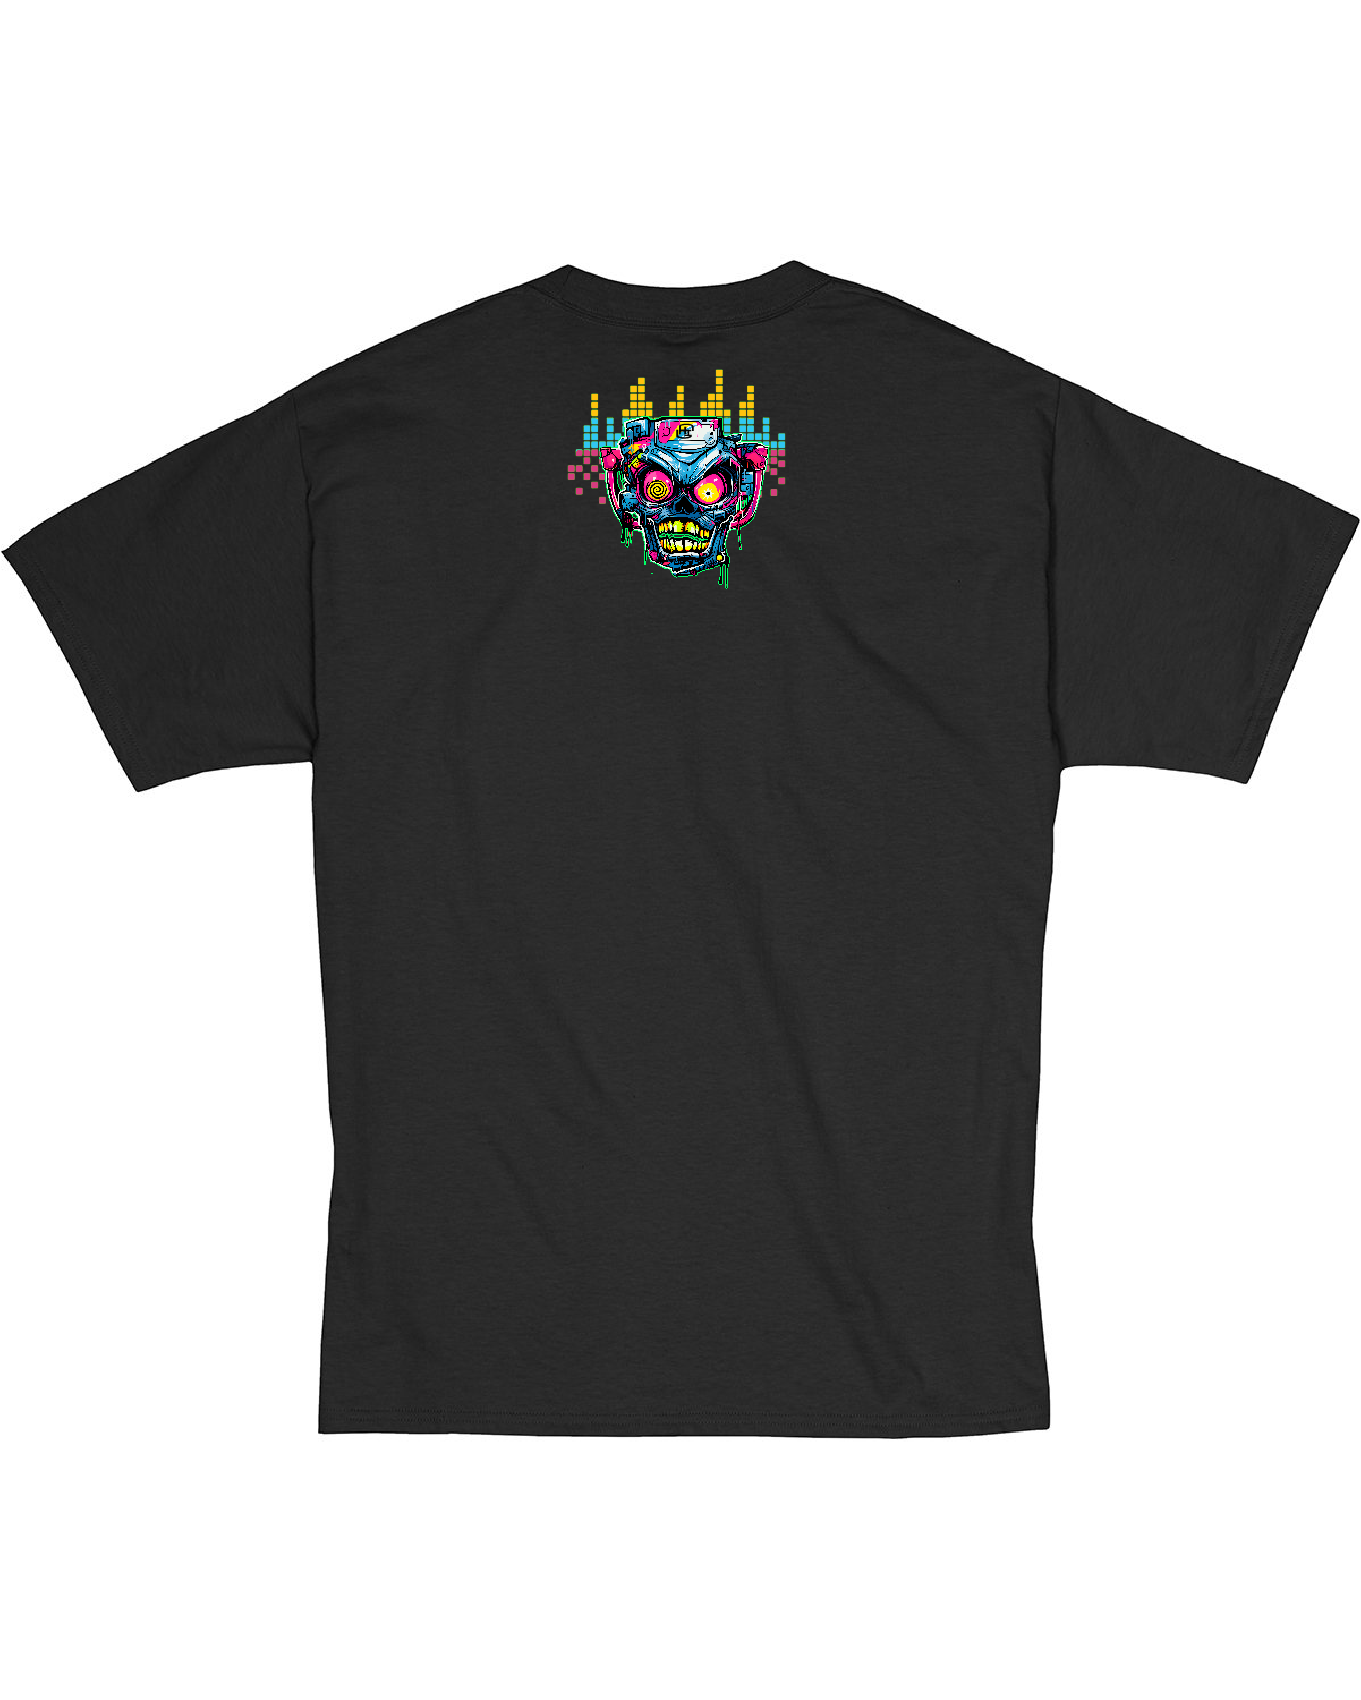 Controlled Chaos T-shirt (Black)